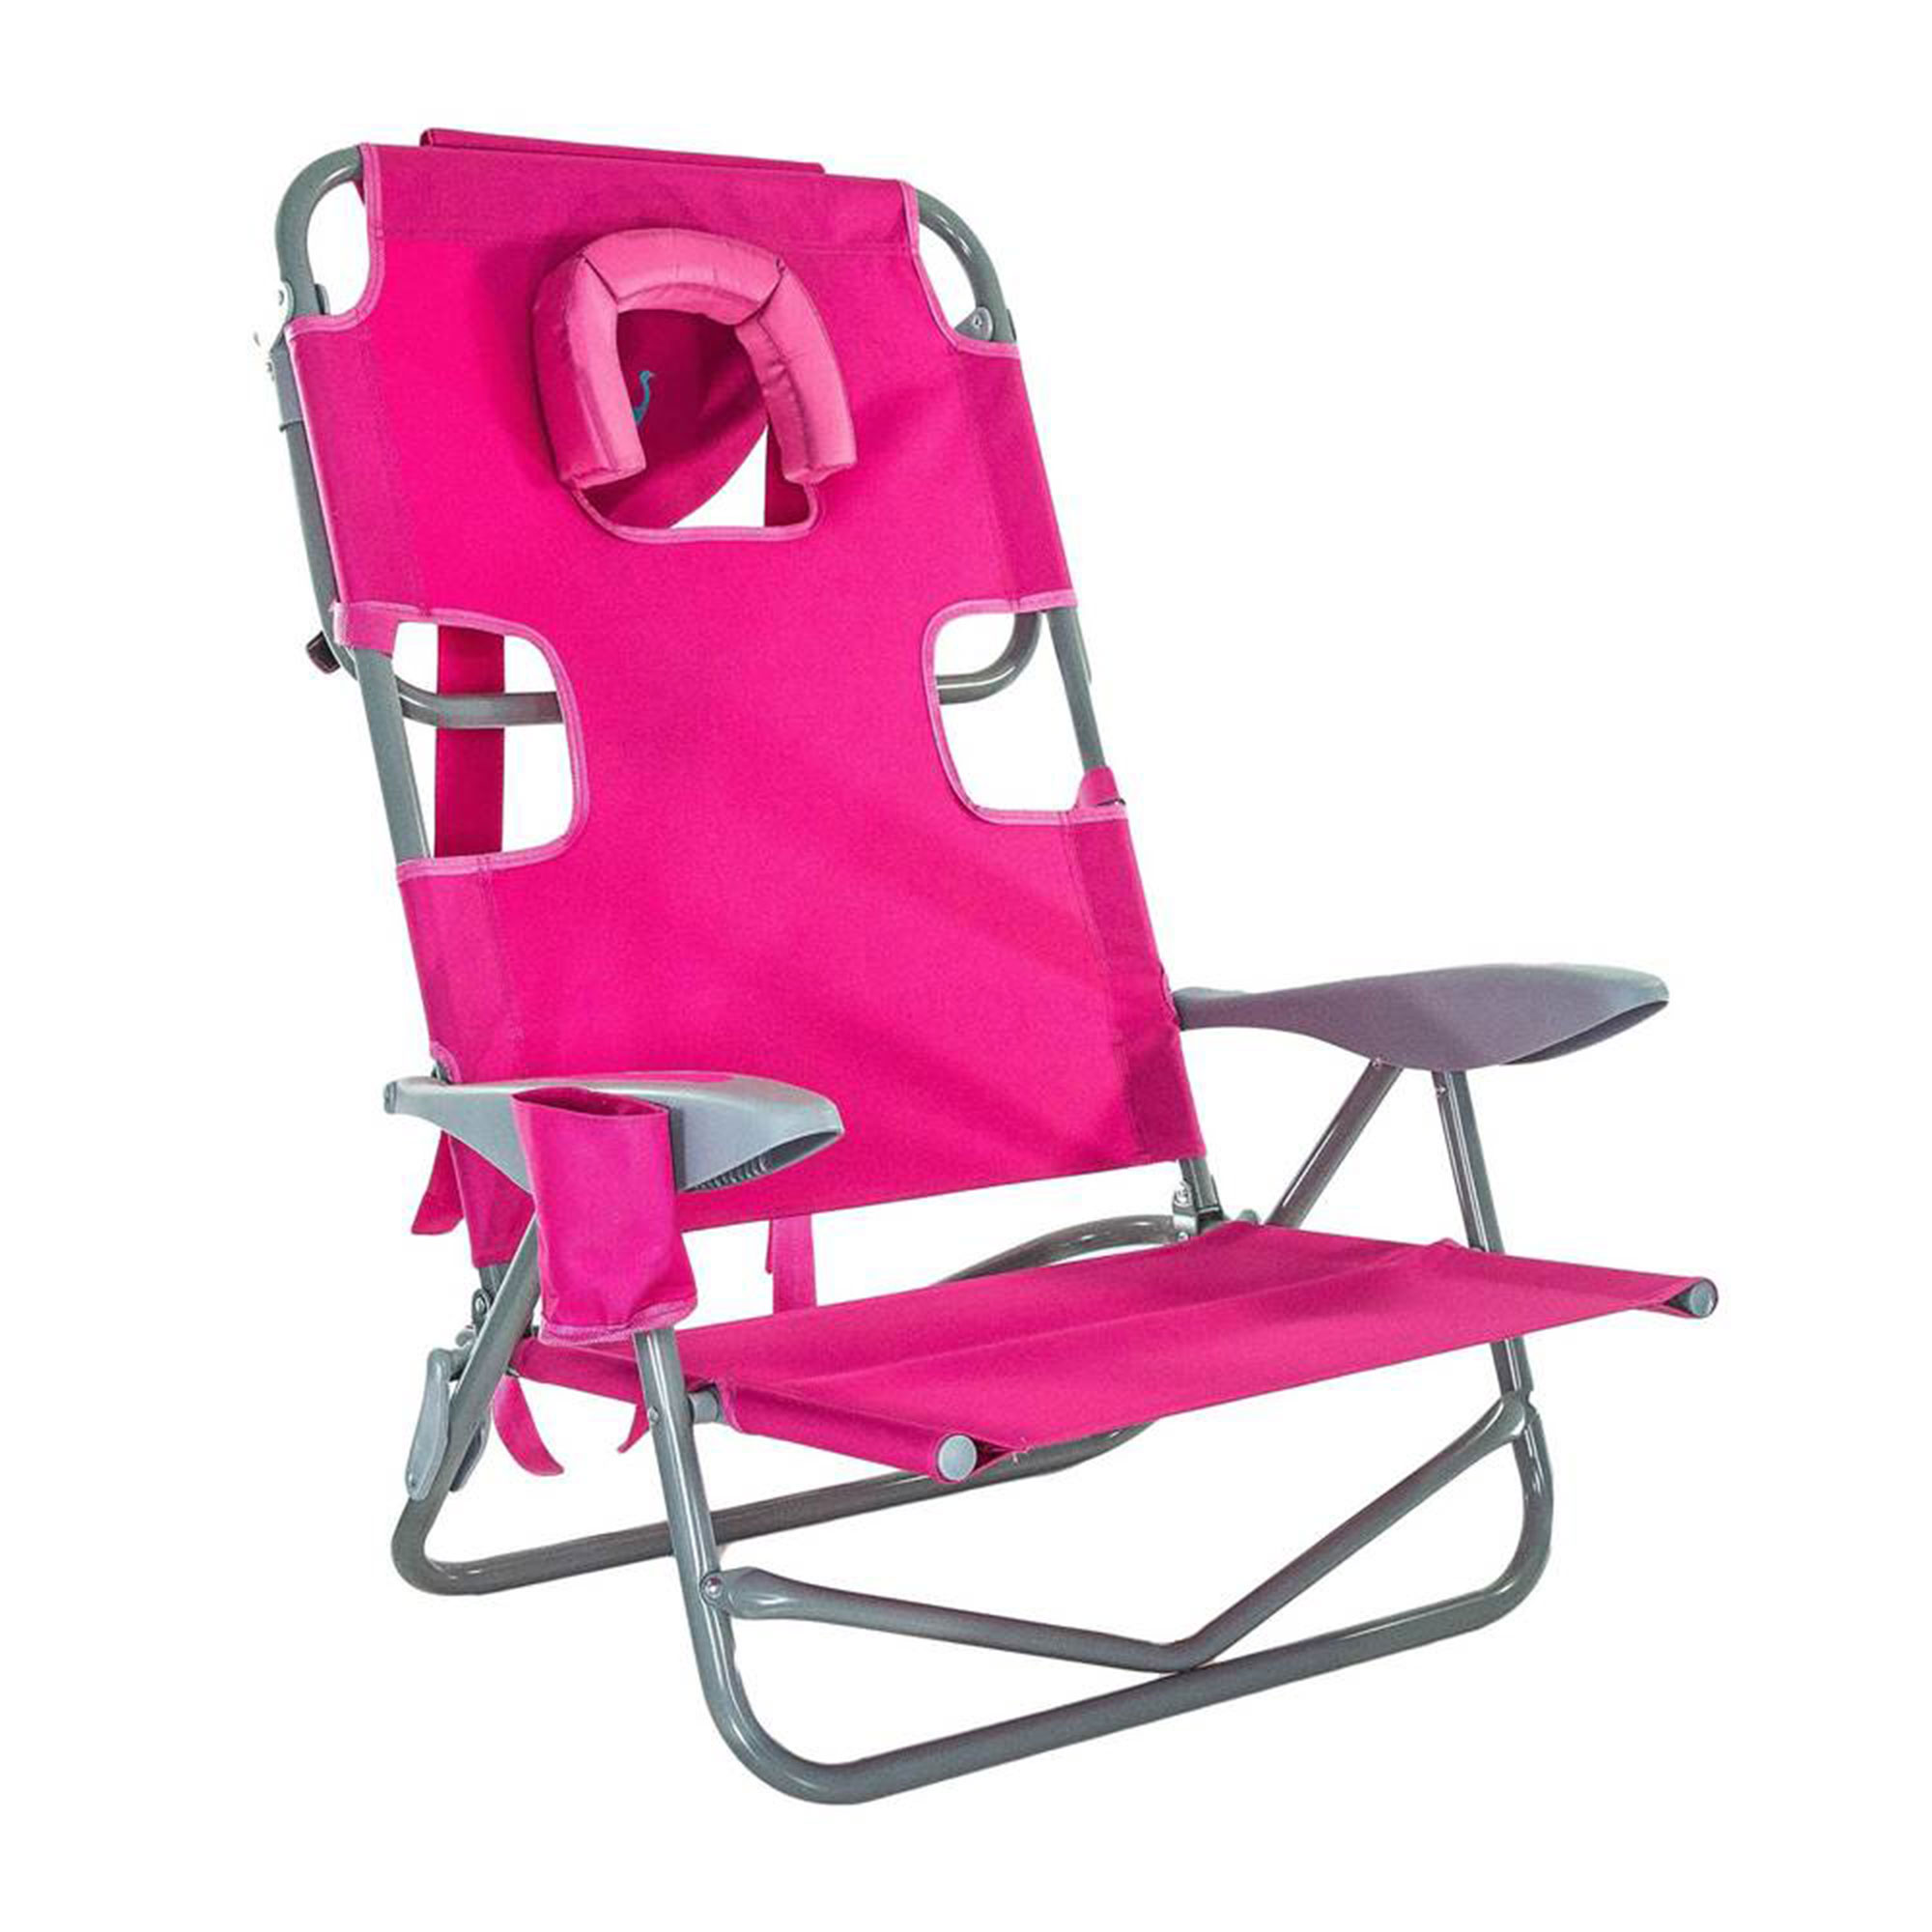 Ostrich On-Your-Back Outdoor Reclining Beach Pool Camping Chair, Pink - image 5 of 9